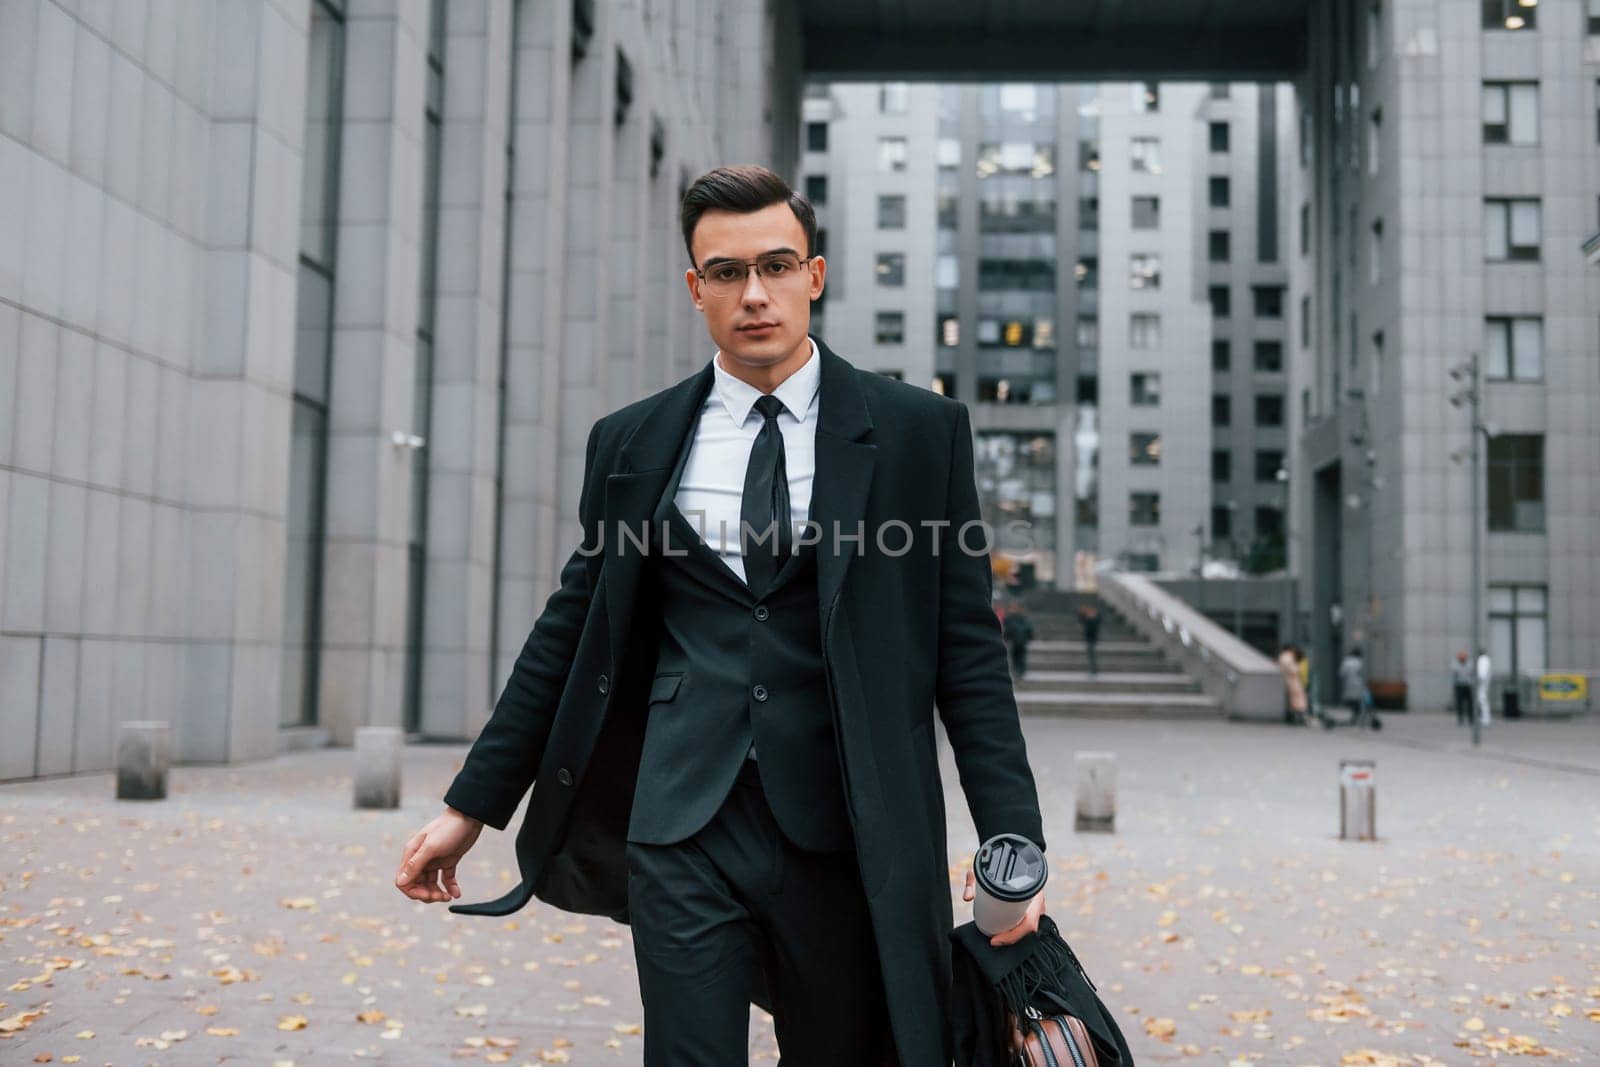 Walking forward. Businessman in black suit and tie is outdoors in the city.